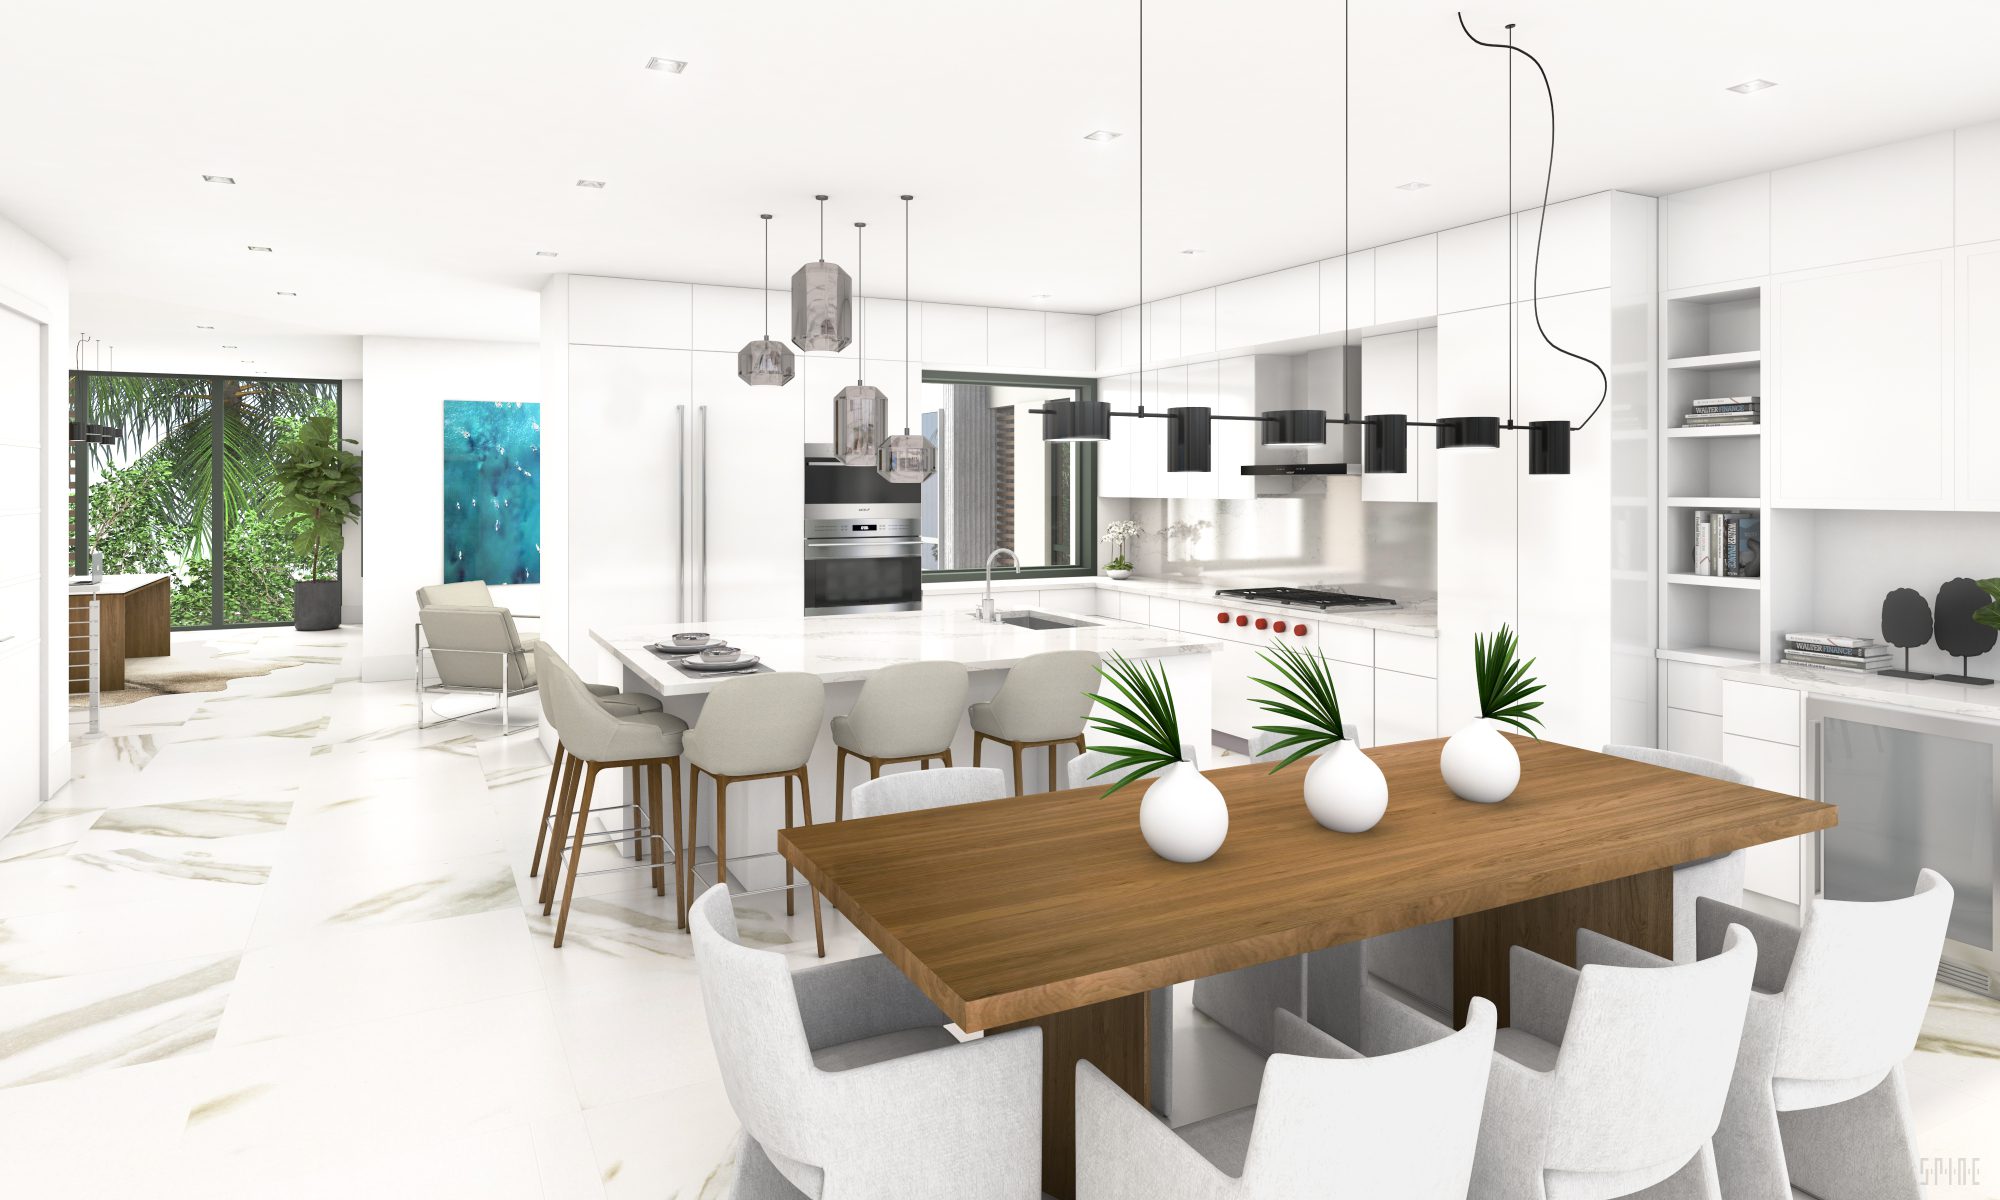 Dahlia Kitchen and Dining Koya Bay Rendering of kitchen with furniture and appliances